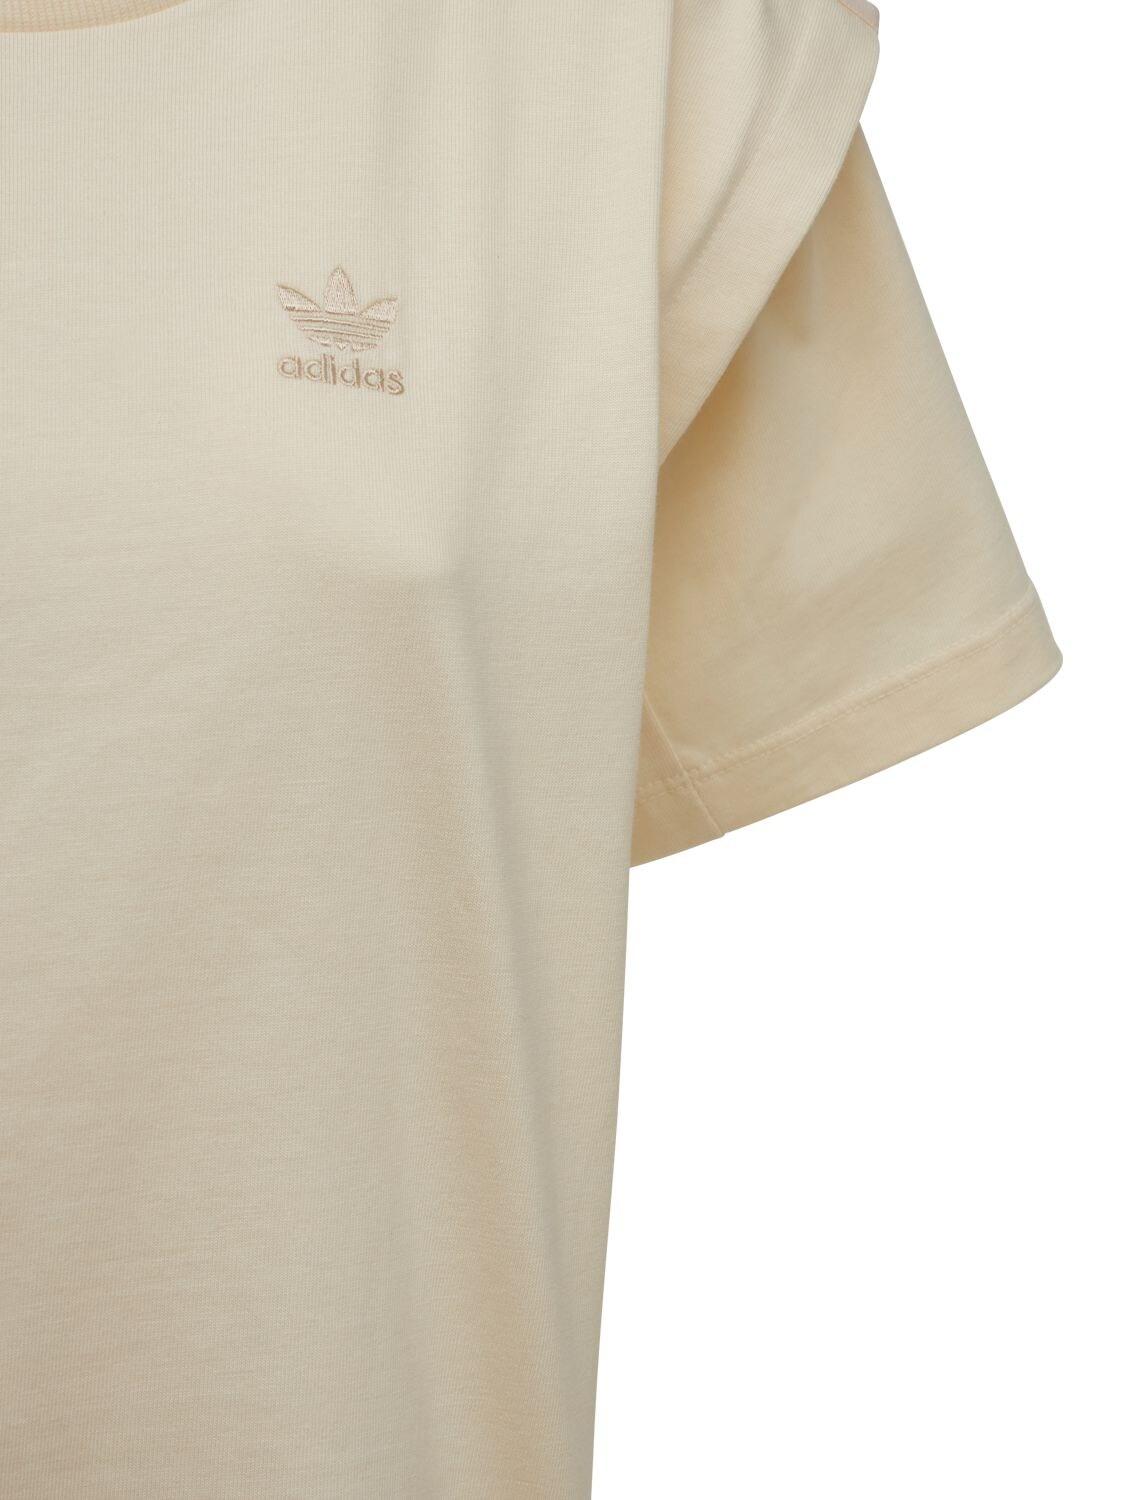 adidas Originals Traceable Icons Cotton T-shirt in Beige (Natural) | Lyst